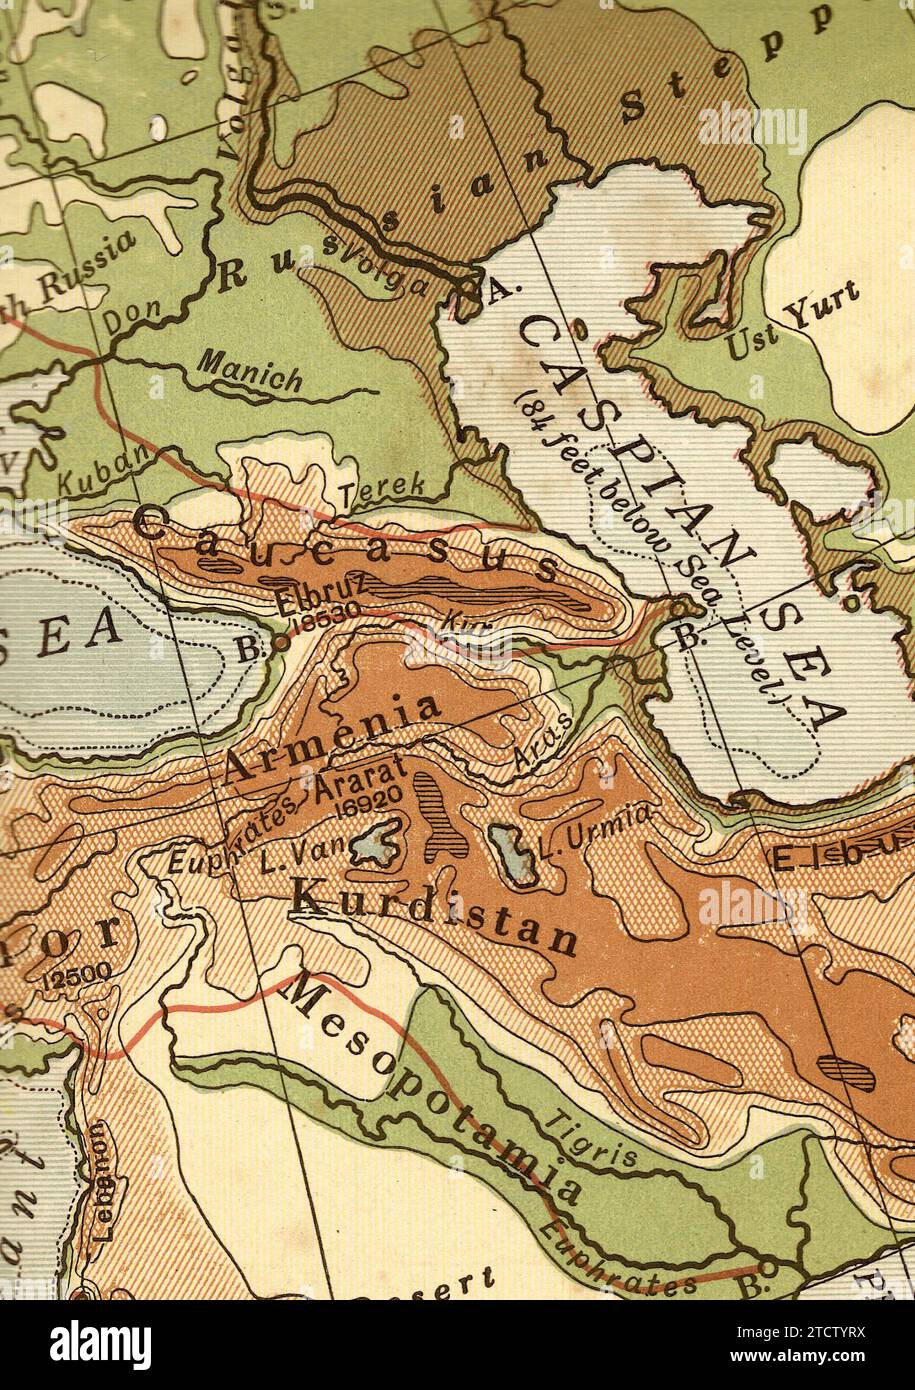 A vintage/antique geographical map in sepia of Armenia, Kurdistan and the Caspian Sea. Stock Photo